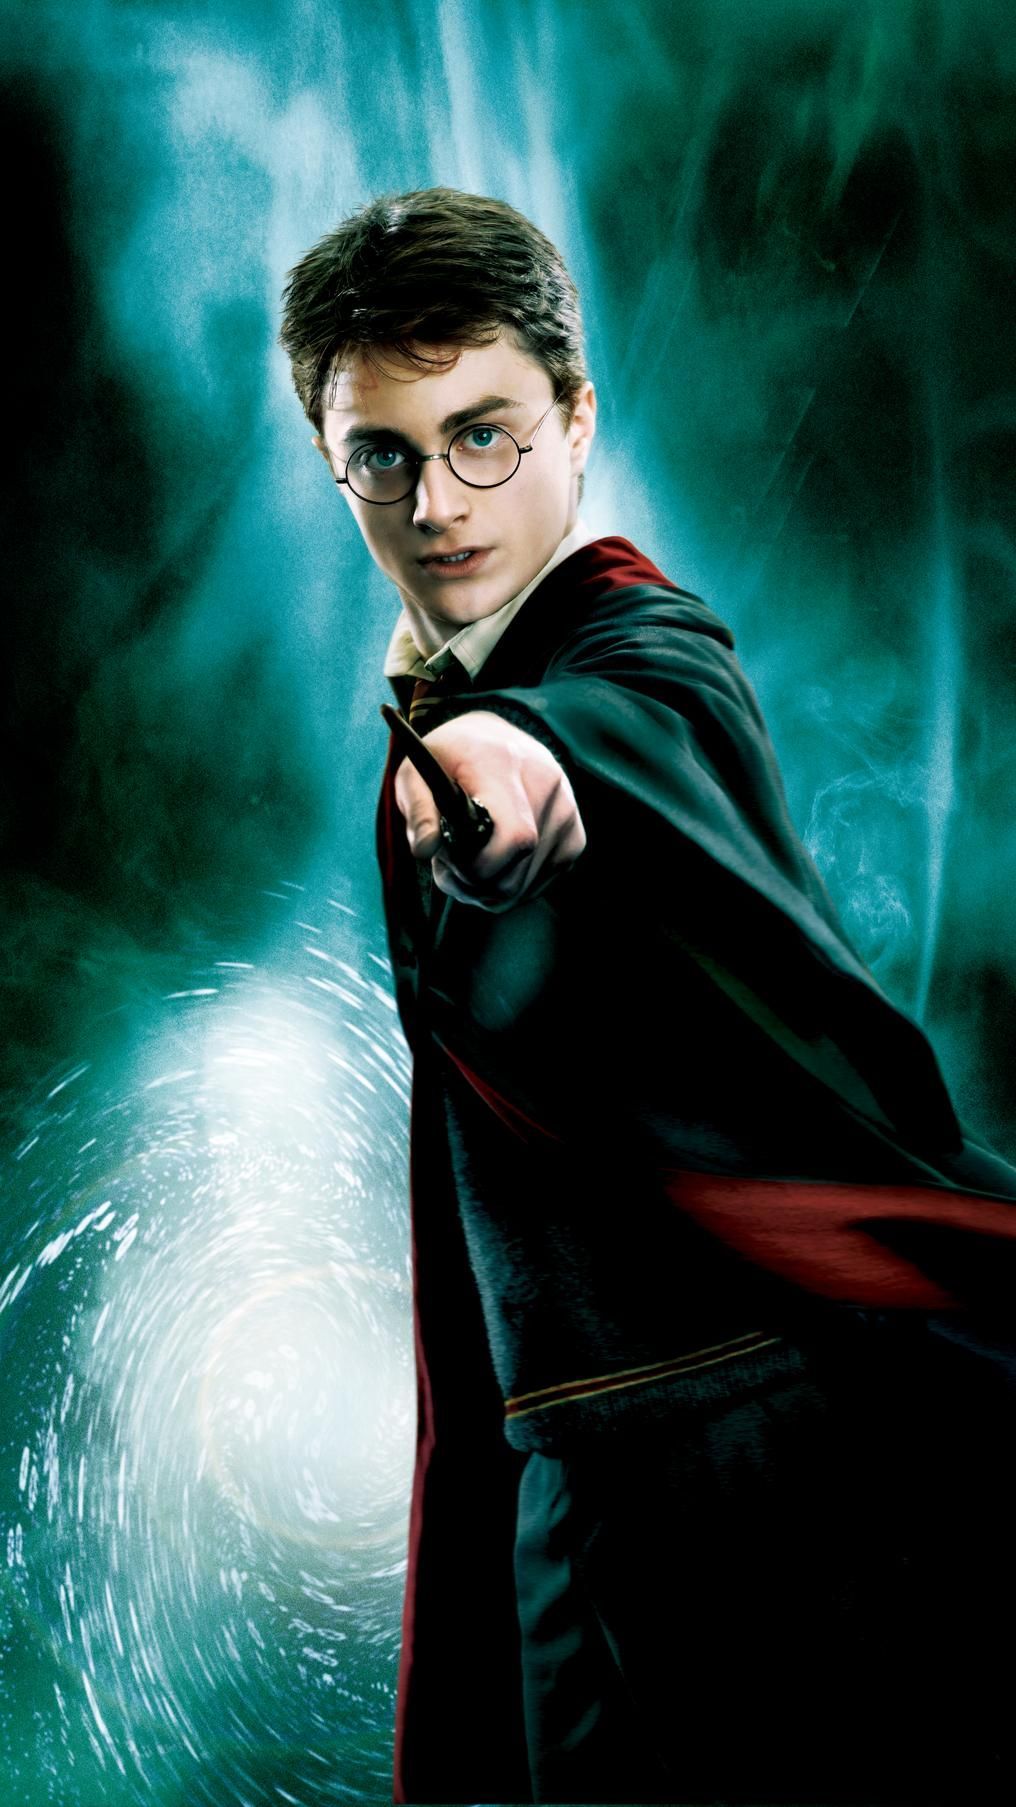 Harry Potter and the Goblet of Fire (2005) Phone Wallpaper in 2020